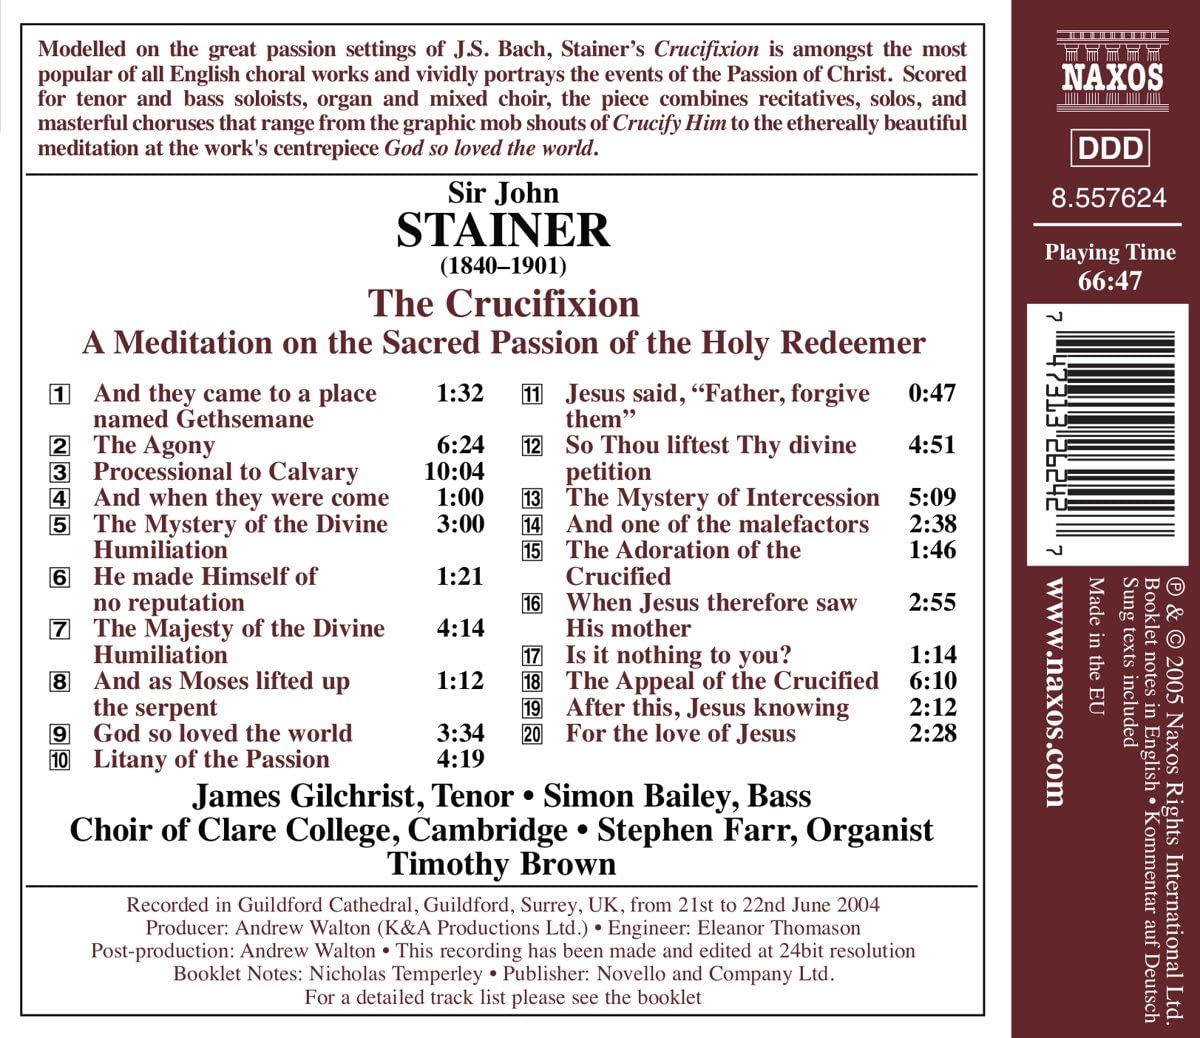 STAINER: The Crucifixion - slide-1